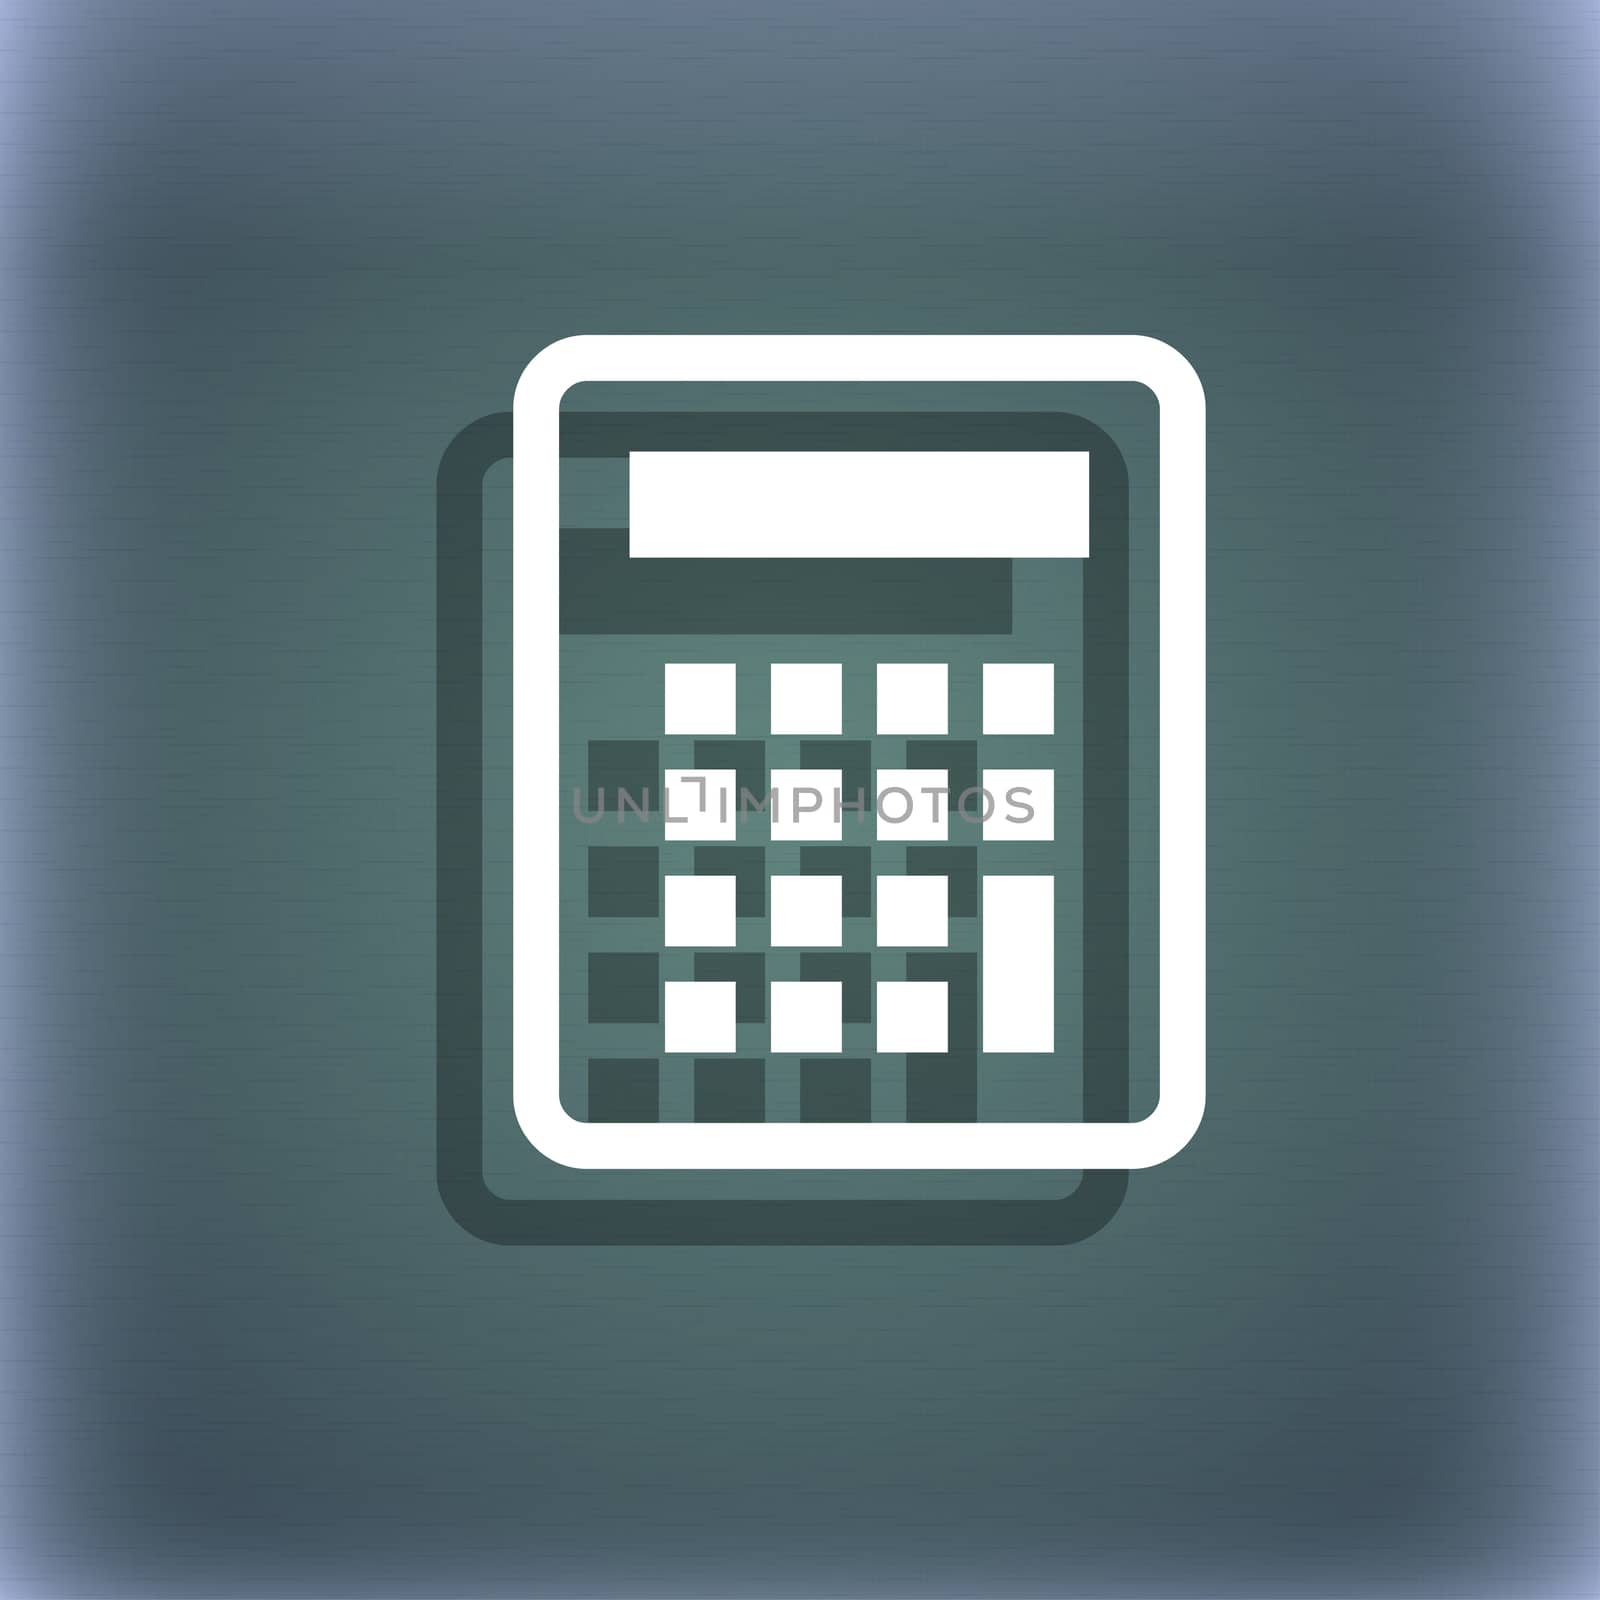 Calculator icon symbol on the blue-green abstract background with shadow and space for your text. illustration